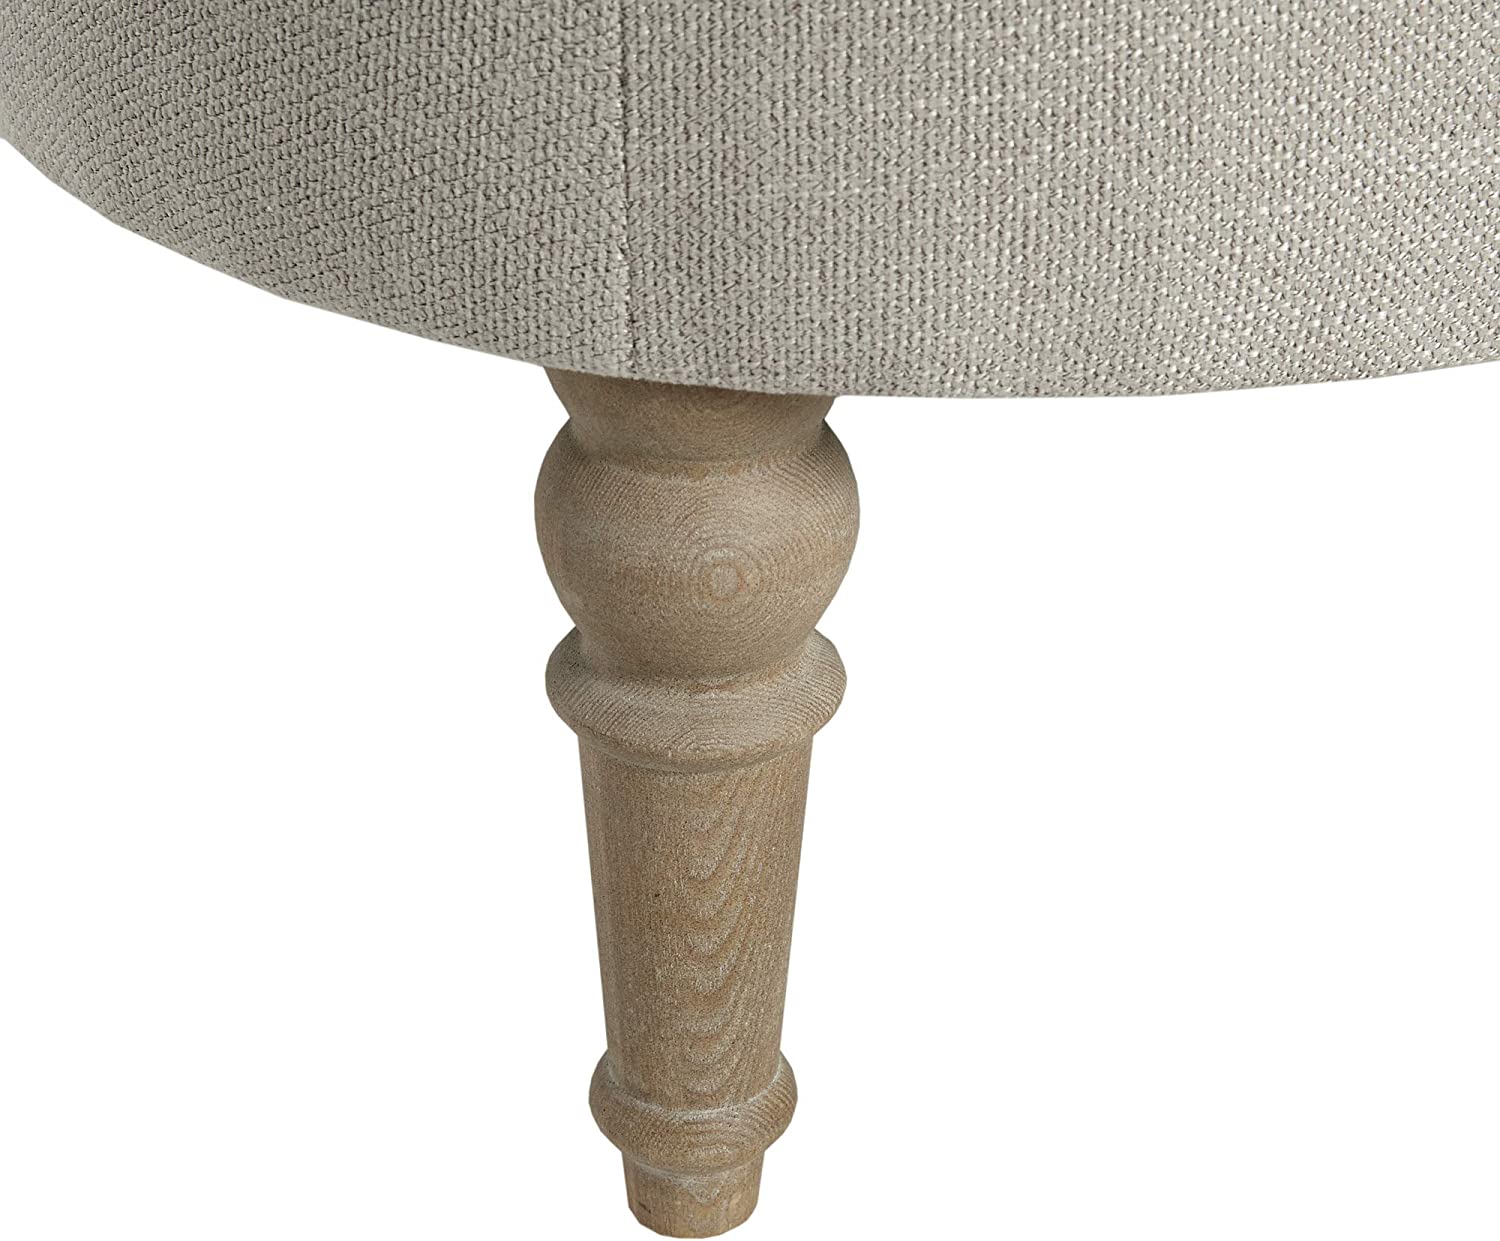 Martha Stewart Clara Cocktail Ottoman-Oval Surfboard Button Tufted, Upholstered Coffee Table for Living Room Foam Padded Footrest, Reclaimed Finished Solid Wood Legs, 48 x 26.75 x 18.75, Grey